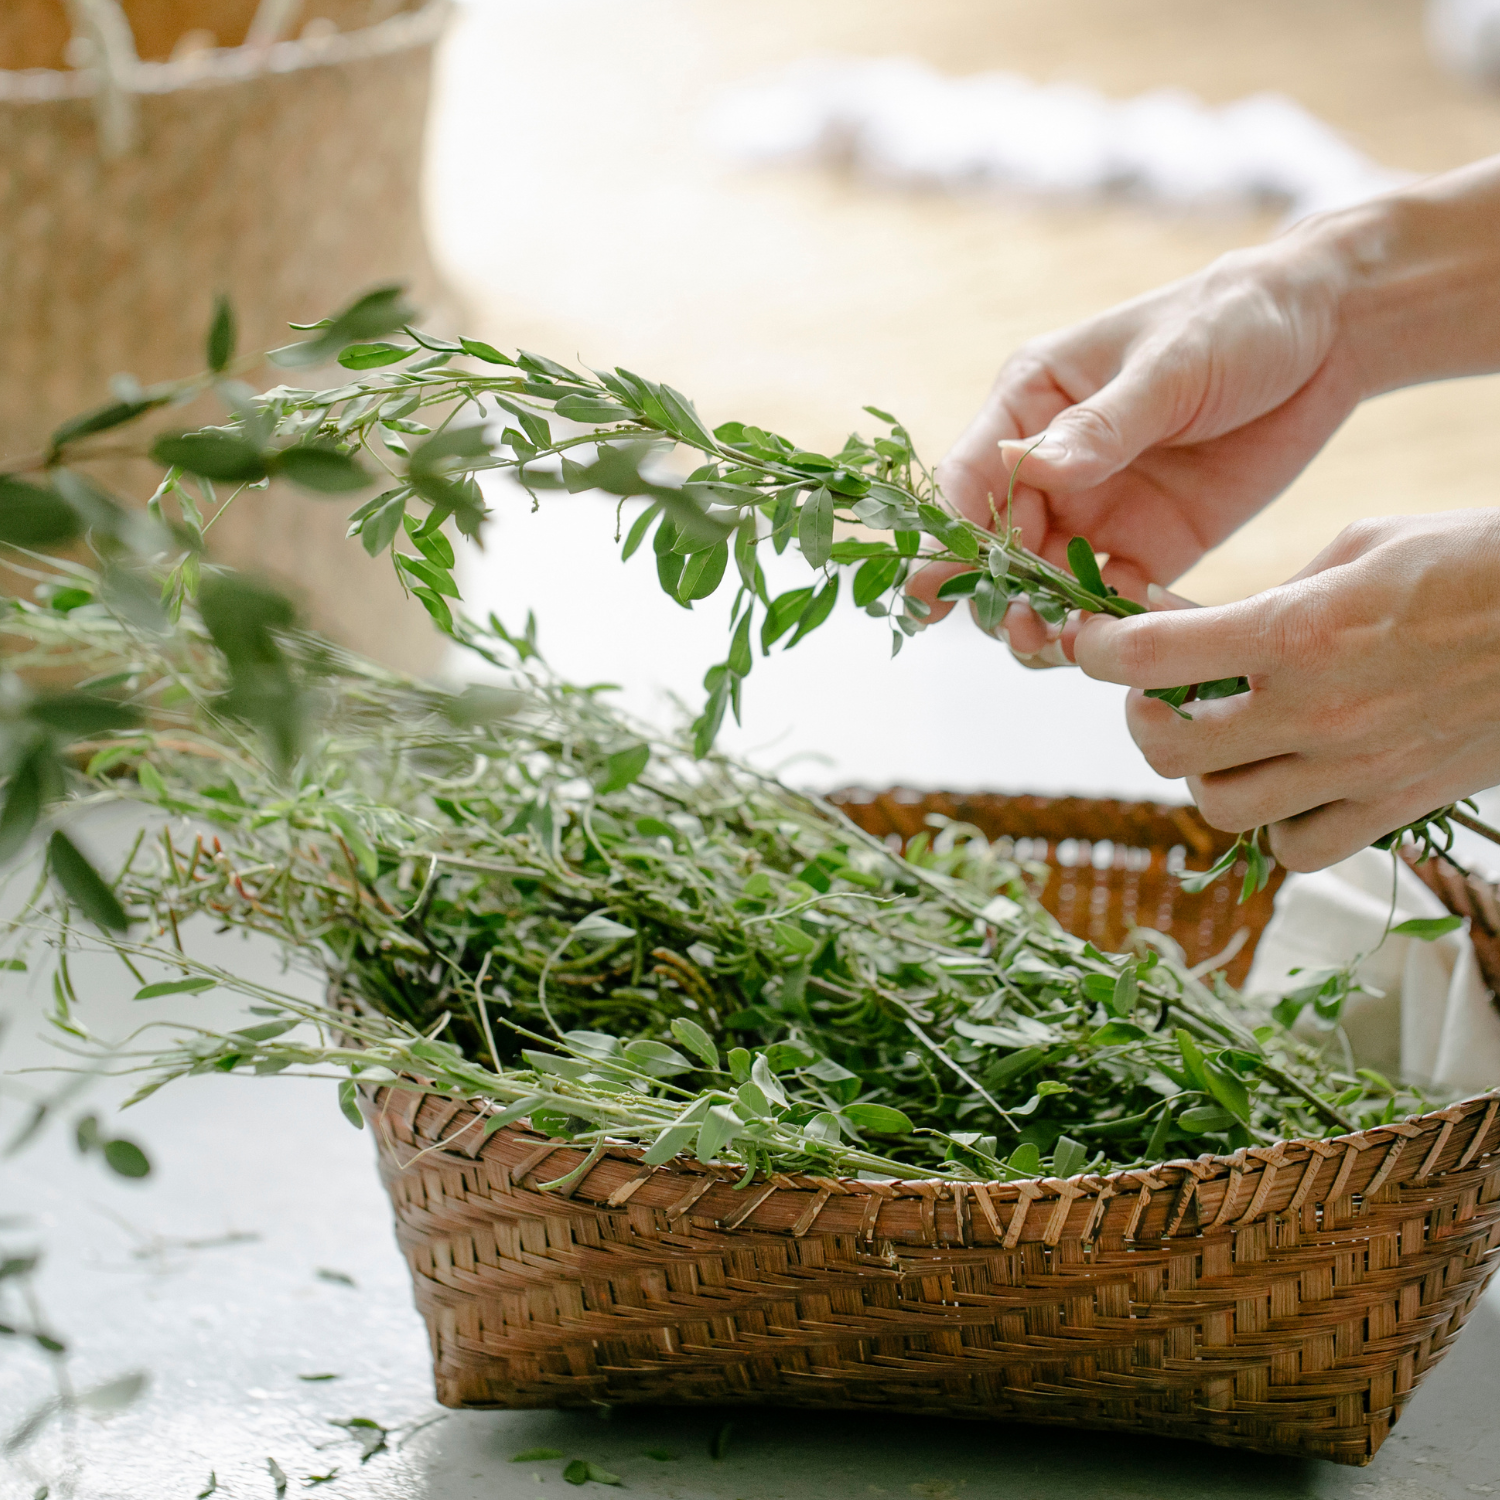 5 Healthy Herbs to Boost Your Nutrition